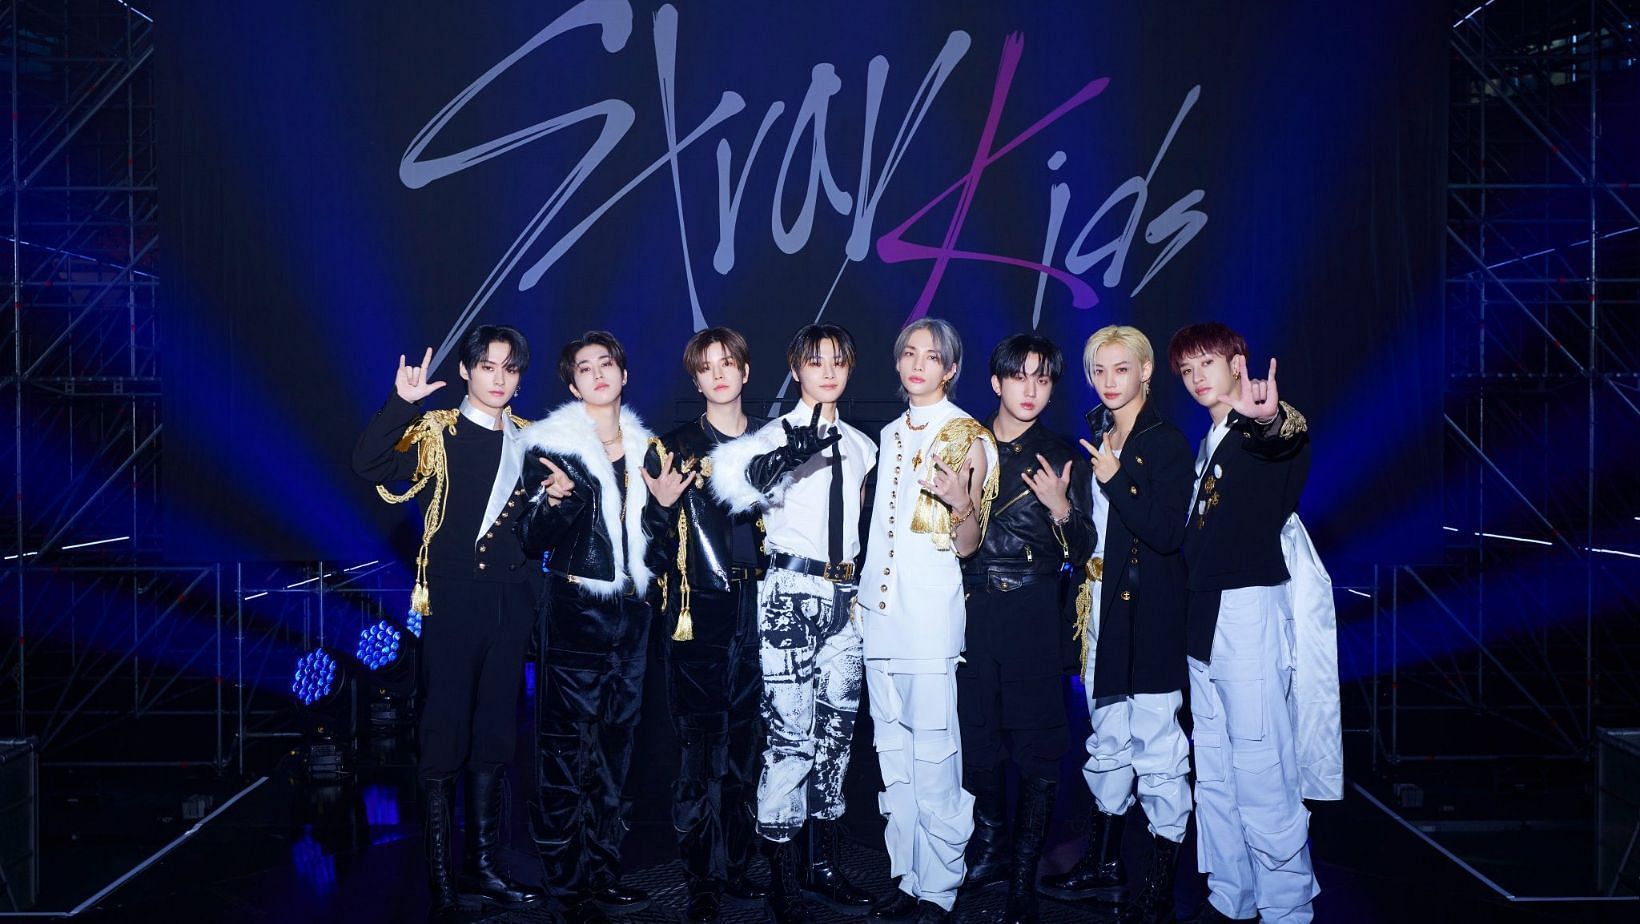 Stray Kids joins Taylor Swift and Travis Scott to sell over 500k pure sales. (Images via @@pixievll)